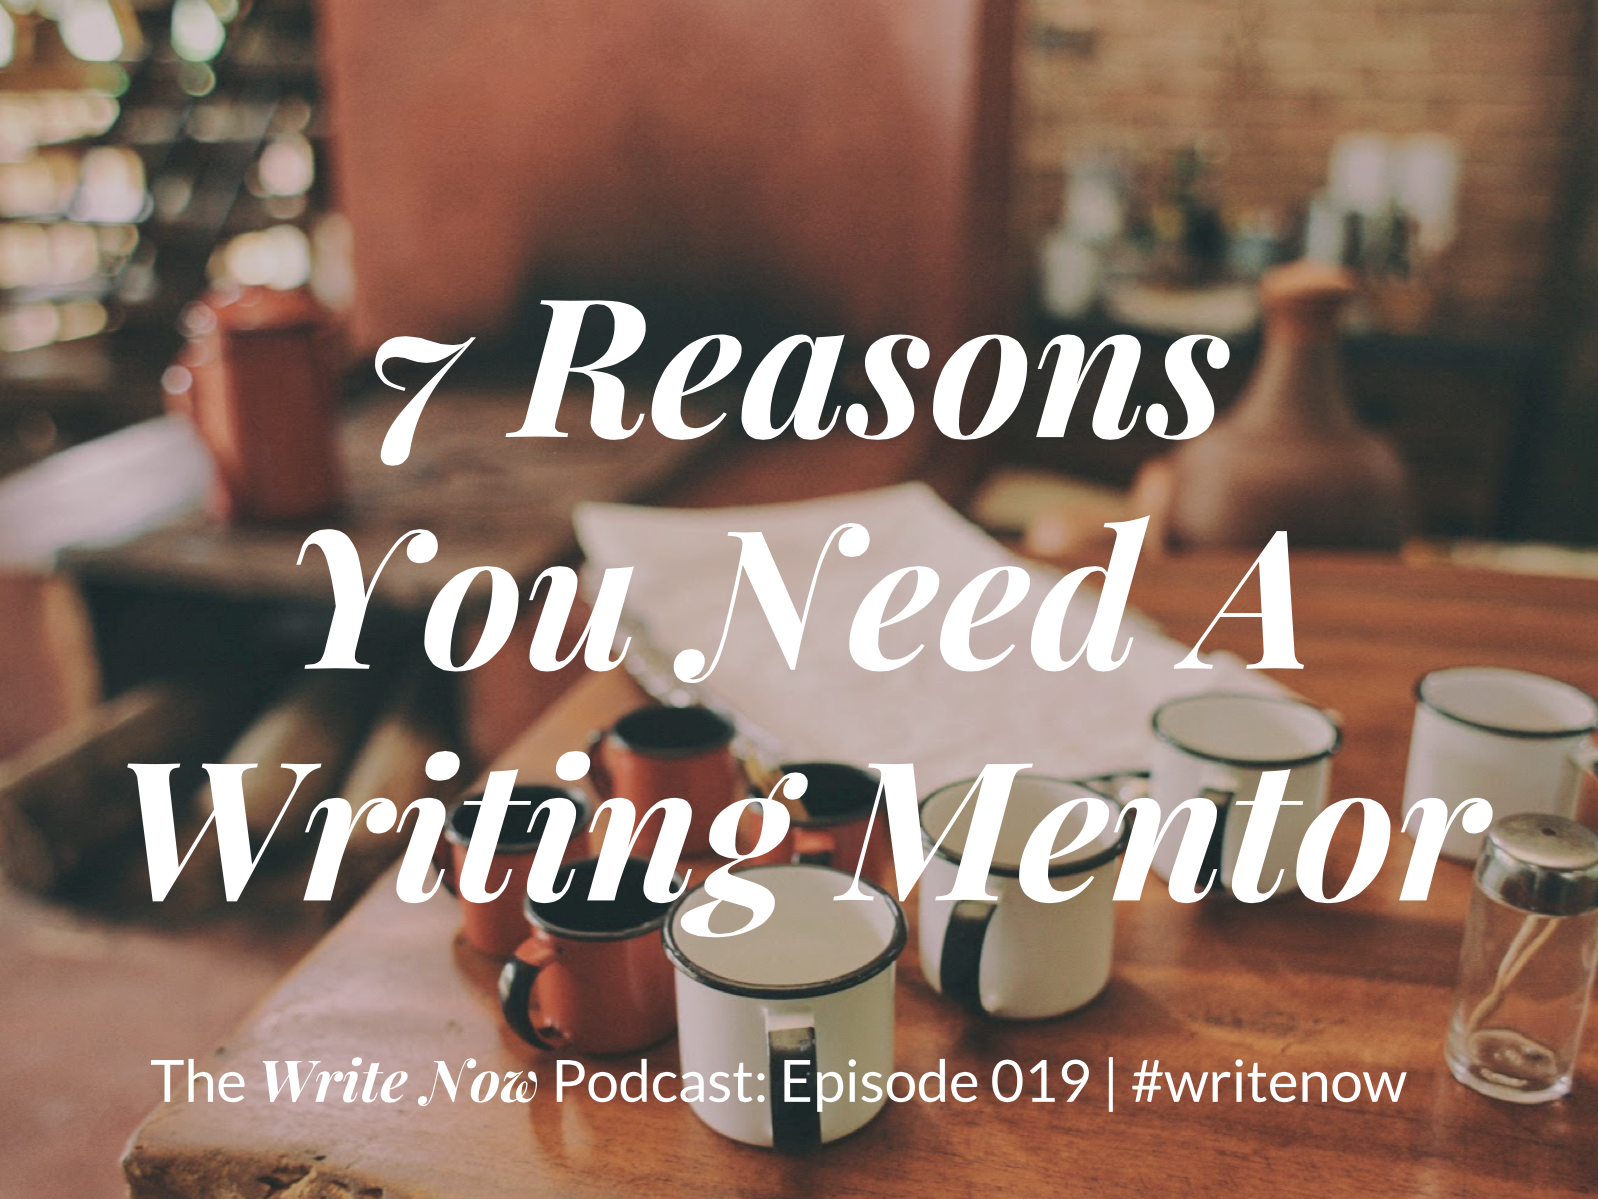 7 reasons you need a writing mentor